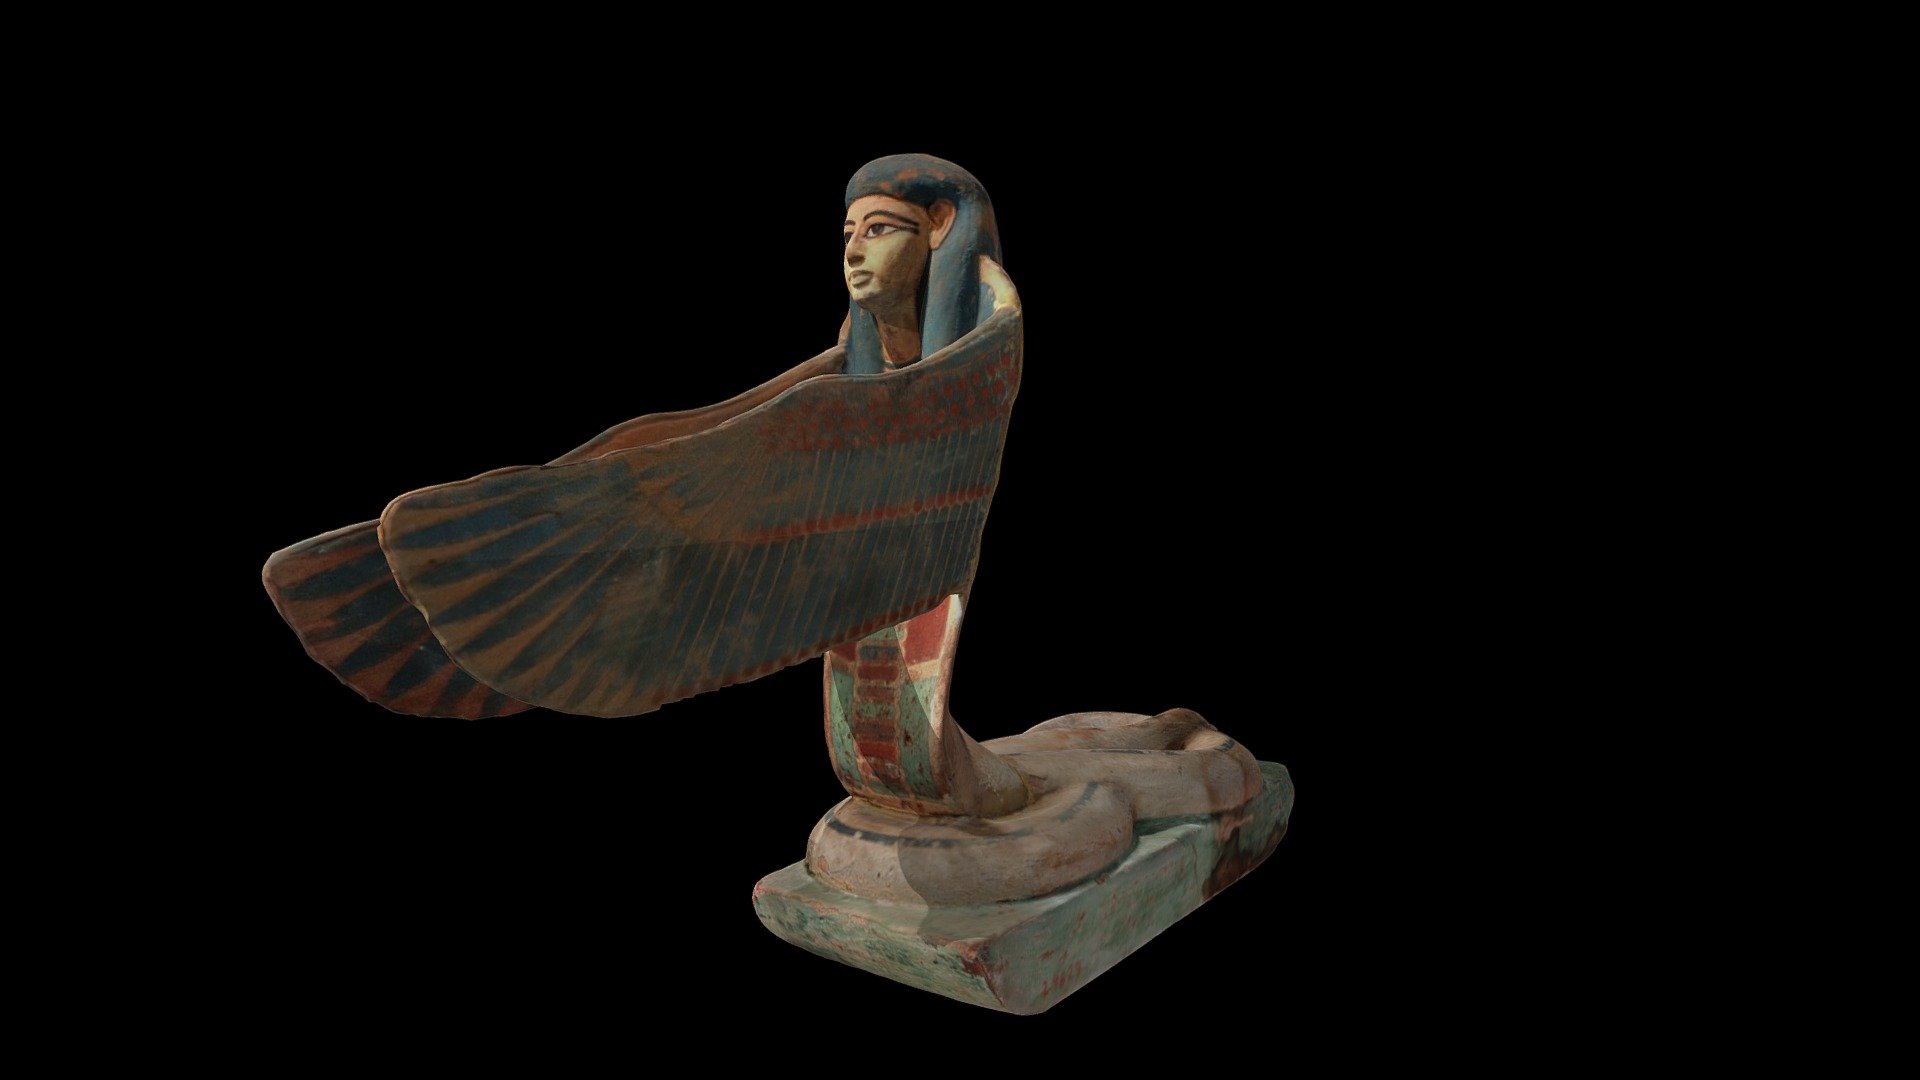 Carved and painted wooden figure of a winged, human-headed snake goddess from Egypt in the collections of the National Museum of Egyptian Civilization (NMEC; Object NMEC 252).  Photographed in November 2022.

Created from 265 photographs (Canon EOS Rebel T7i) using Metashape 1.8.4, Blender 2.92, and Instant Meshes 3d model